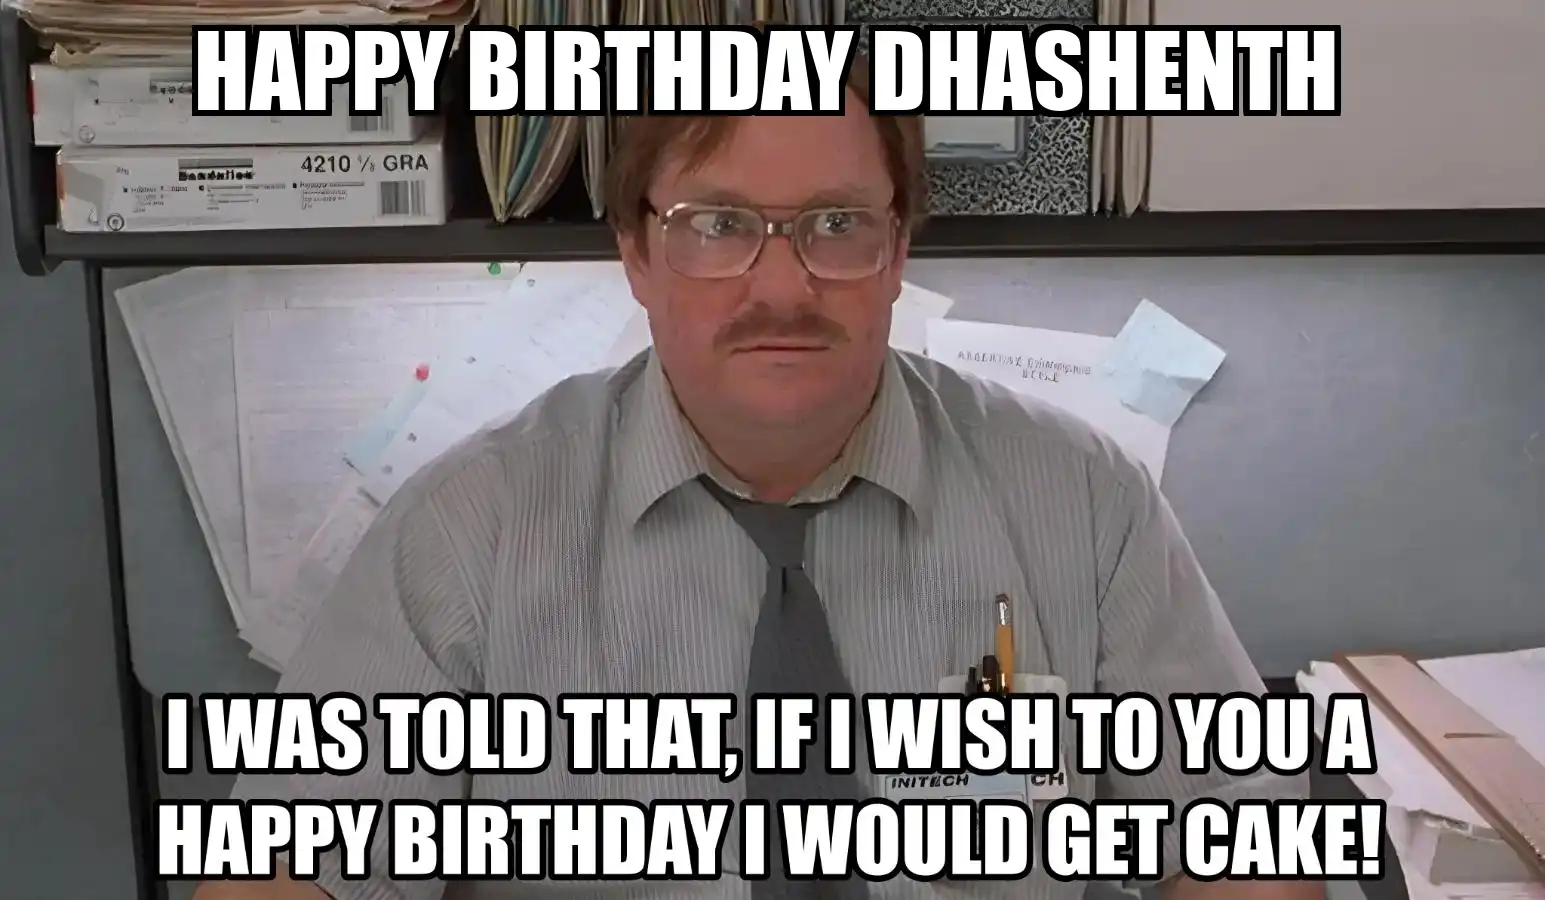 Happy Birthday Dhashenth I Would Get A Cake Meme